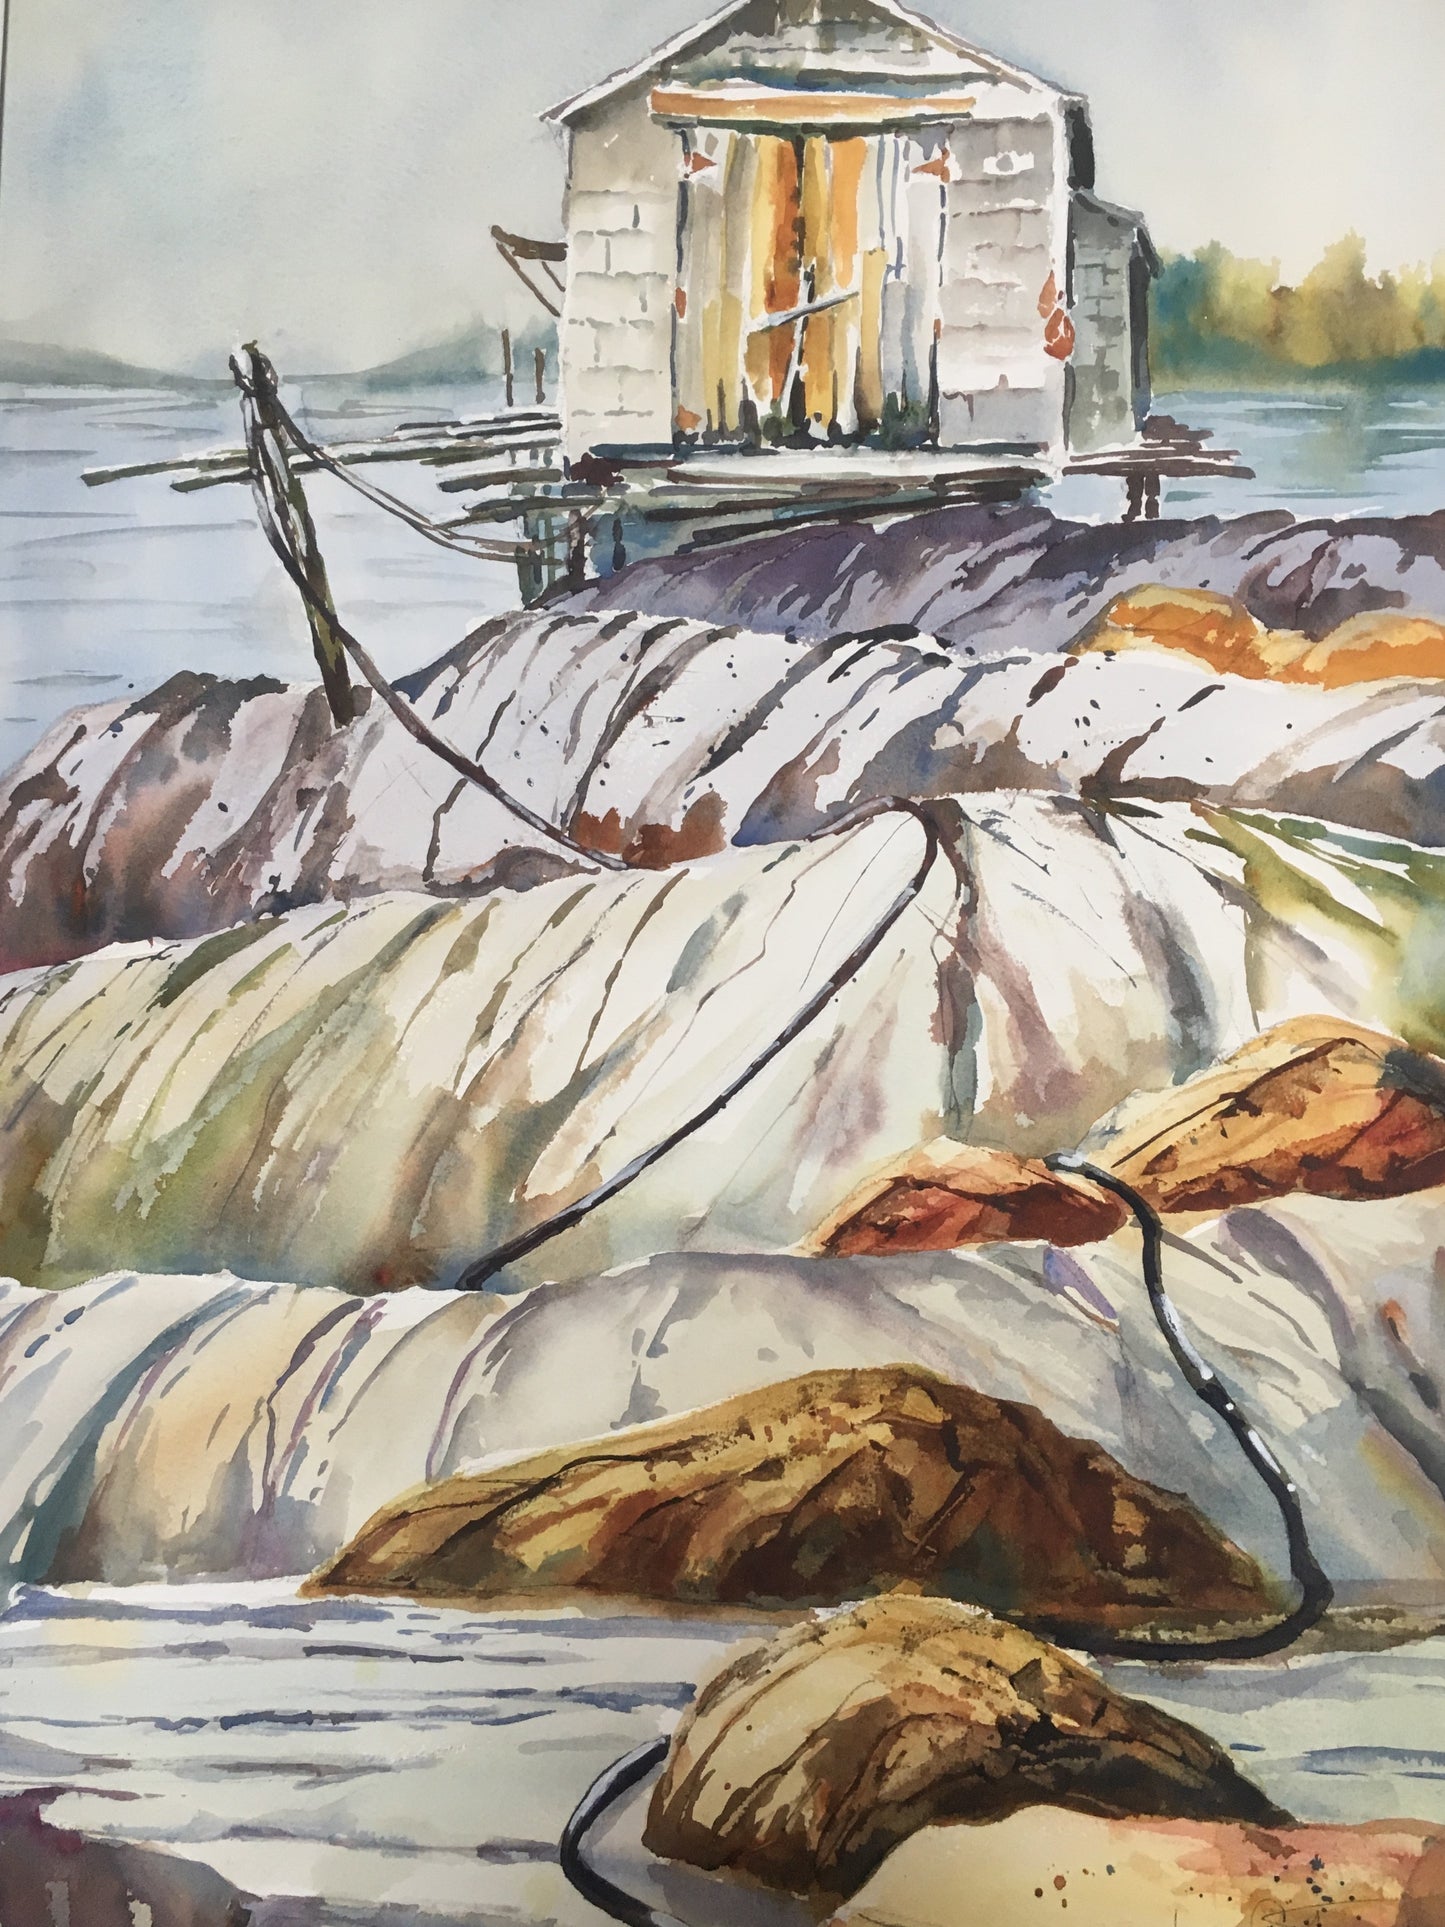 Still Connected by Heather Crout - Watercolors | Art 1274 Hollis